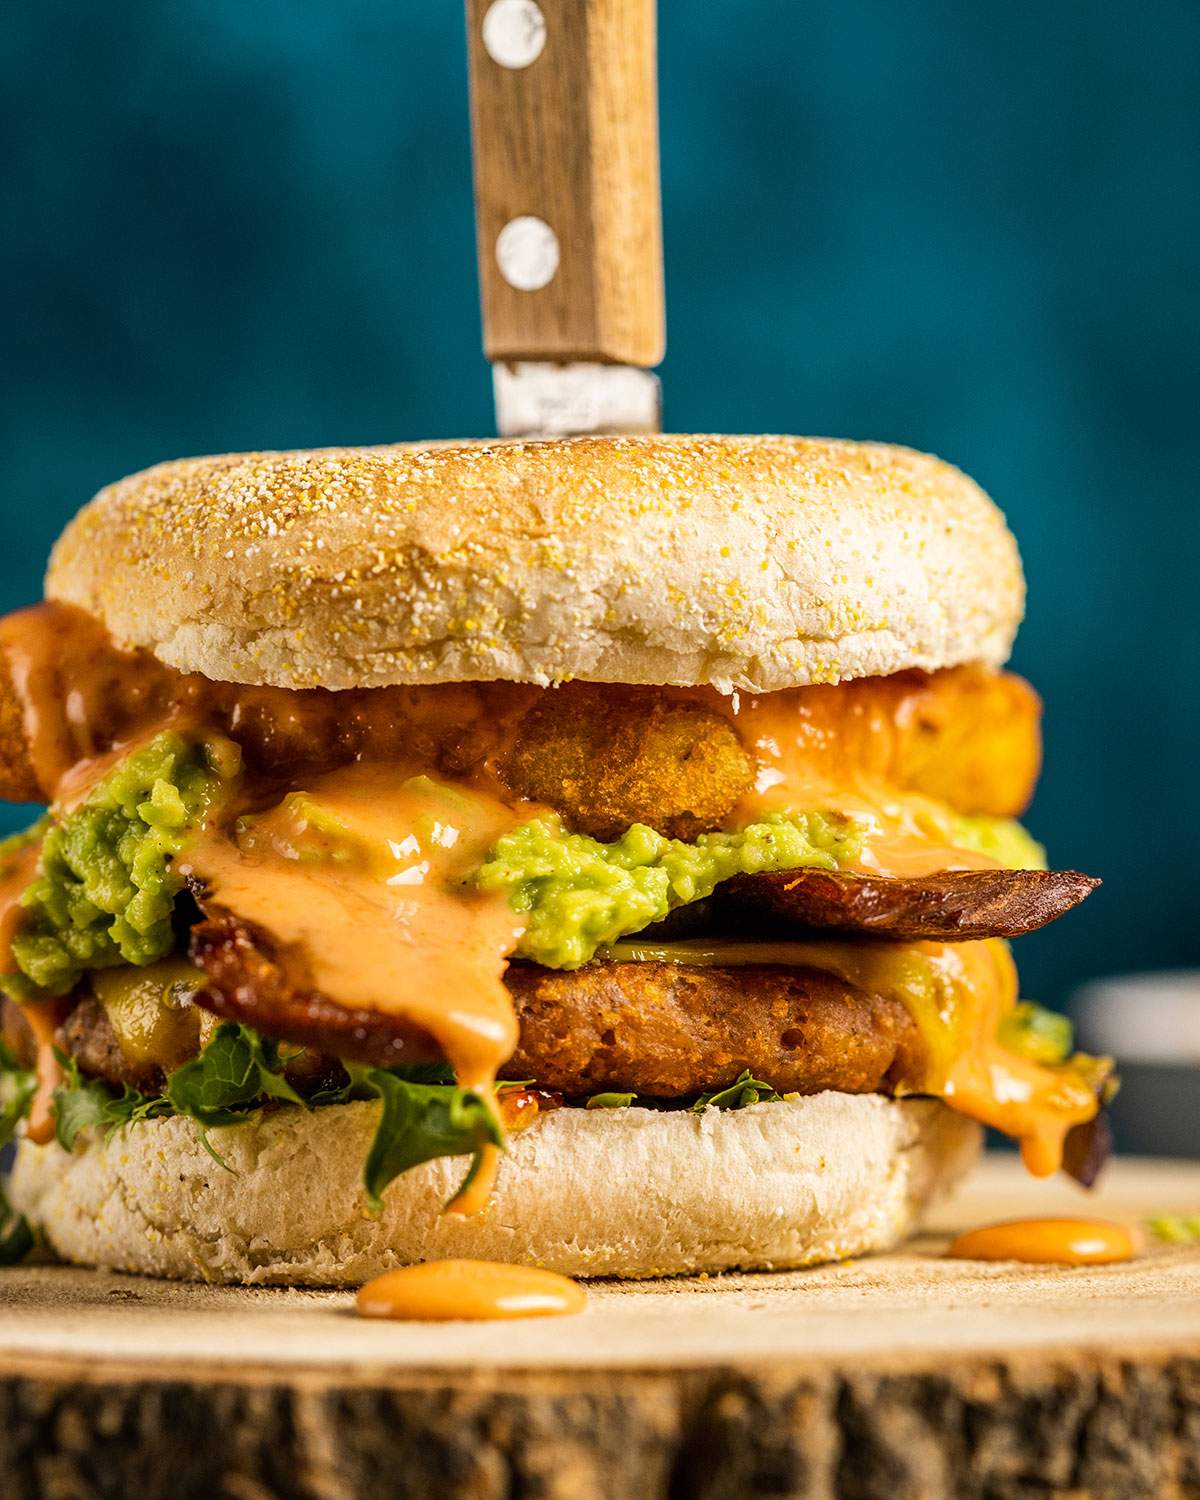 A breakfast burger shown up close with layers of lettuce, English muffin, hashbrown, guacamole, vegan bacon and burger patty, drizzled with a vegan burger sauce.